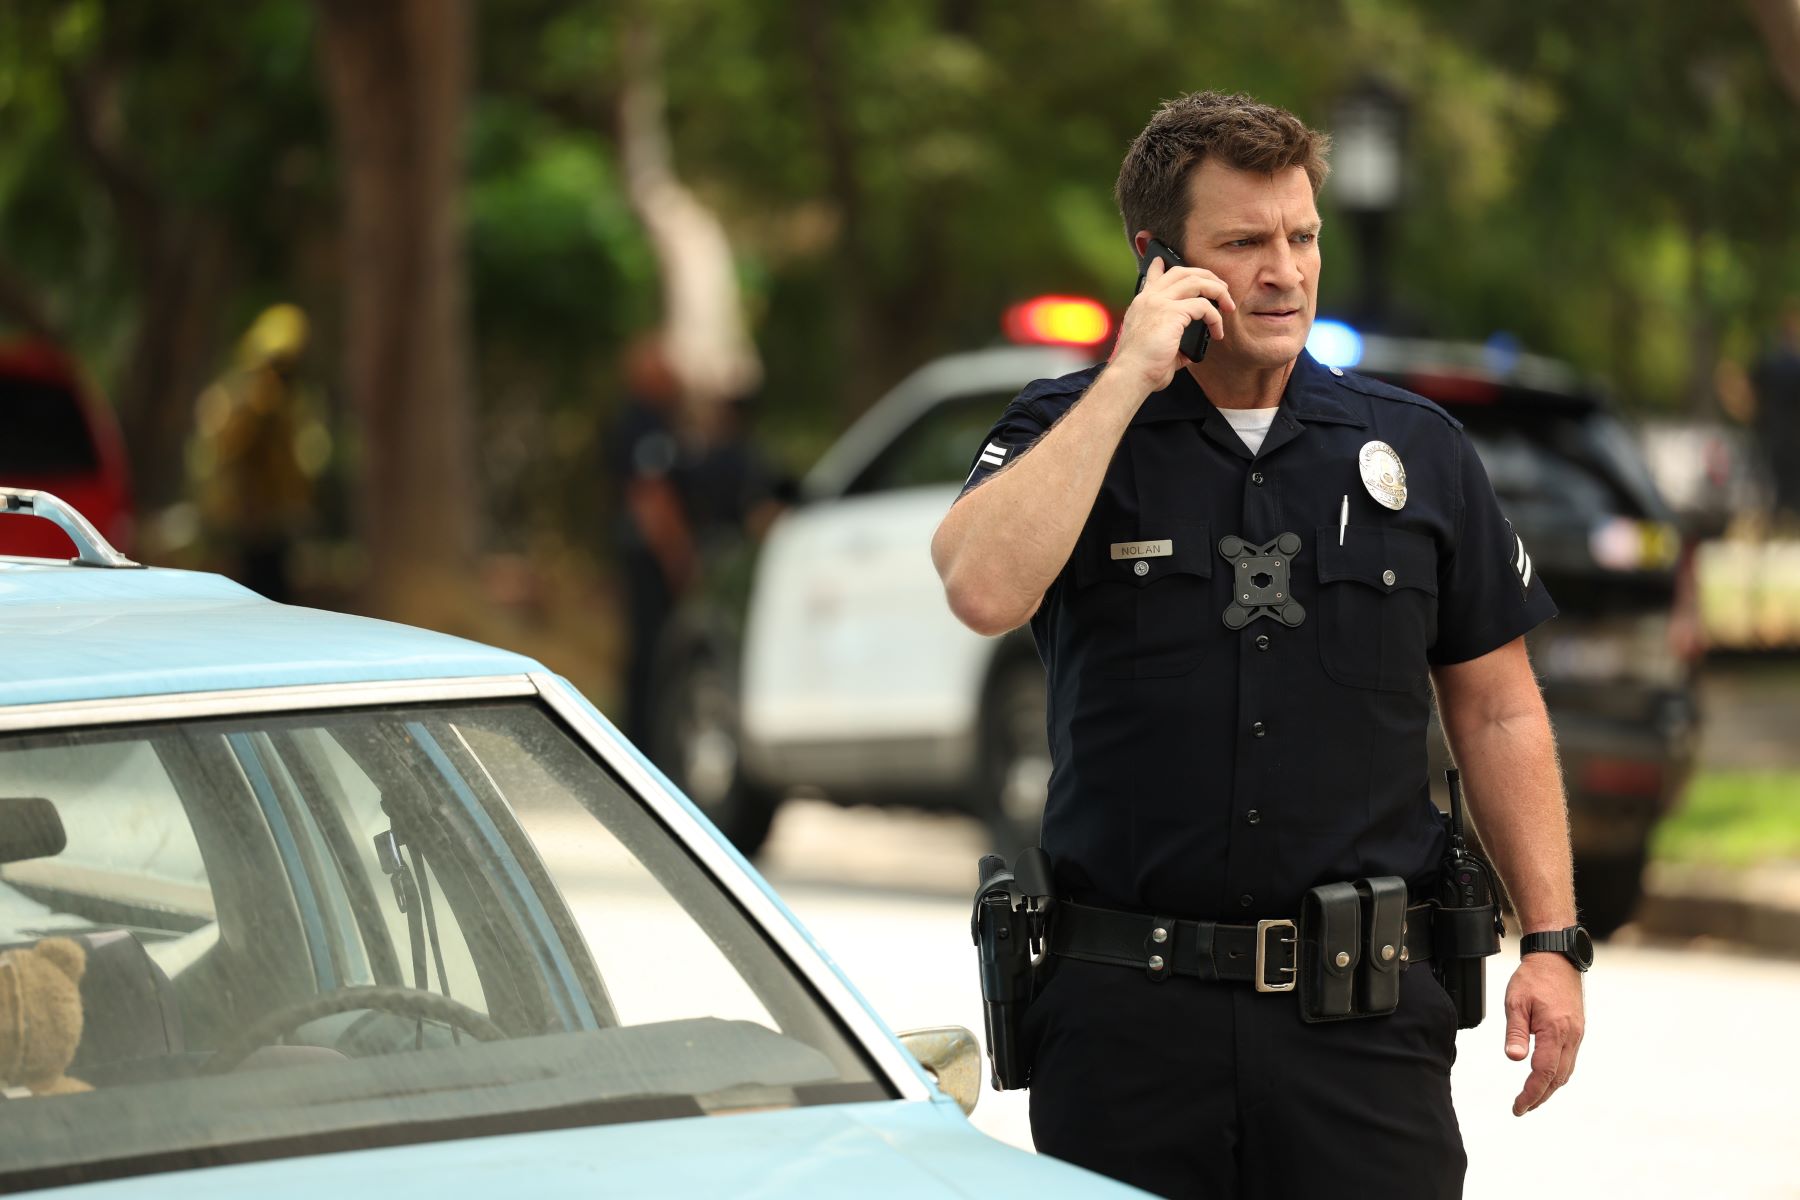 Nathan Fillion, in character as John Nolan in 'The Rookie' Season 5 on ABC, wears his dark blue police uniform while holding his cell phone up to his ear.